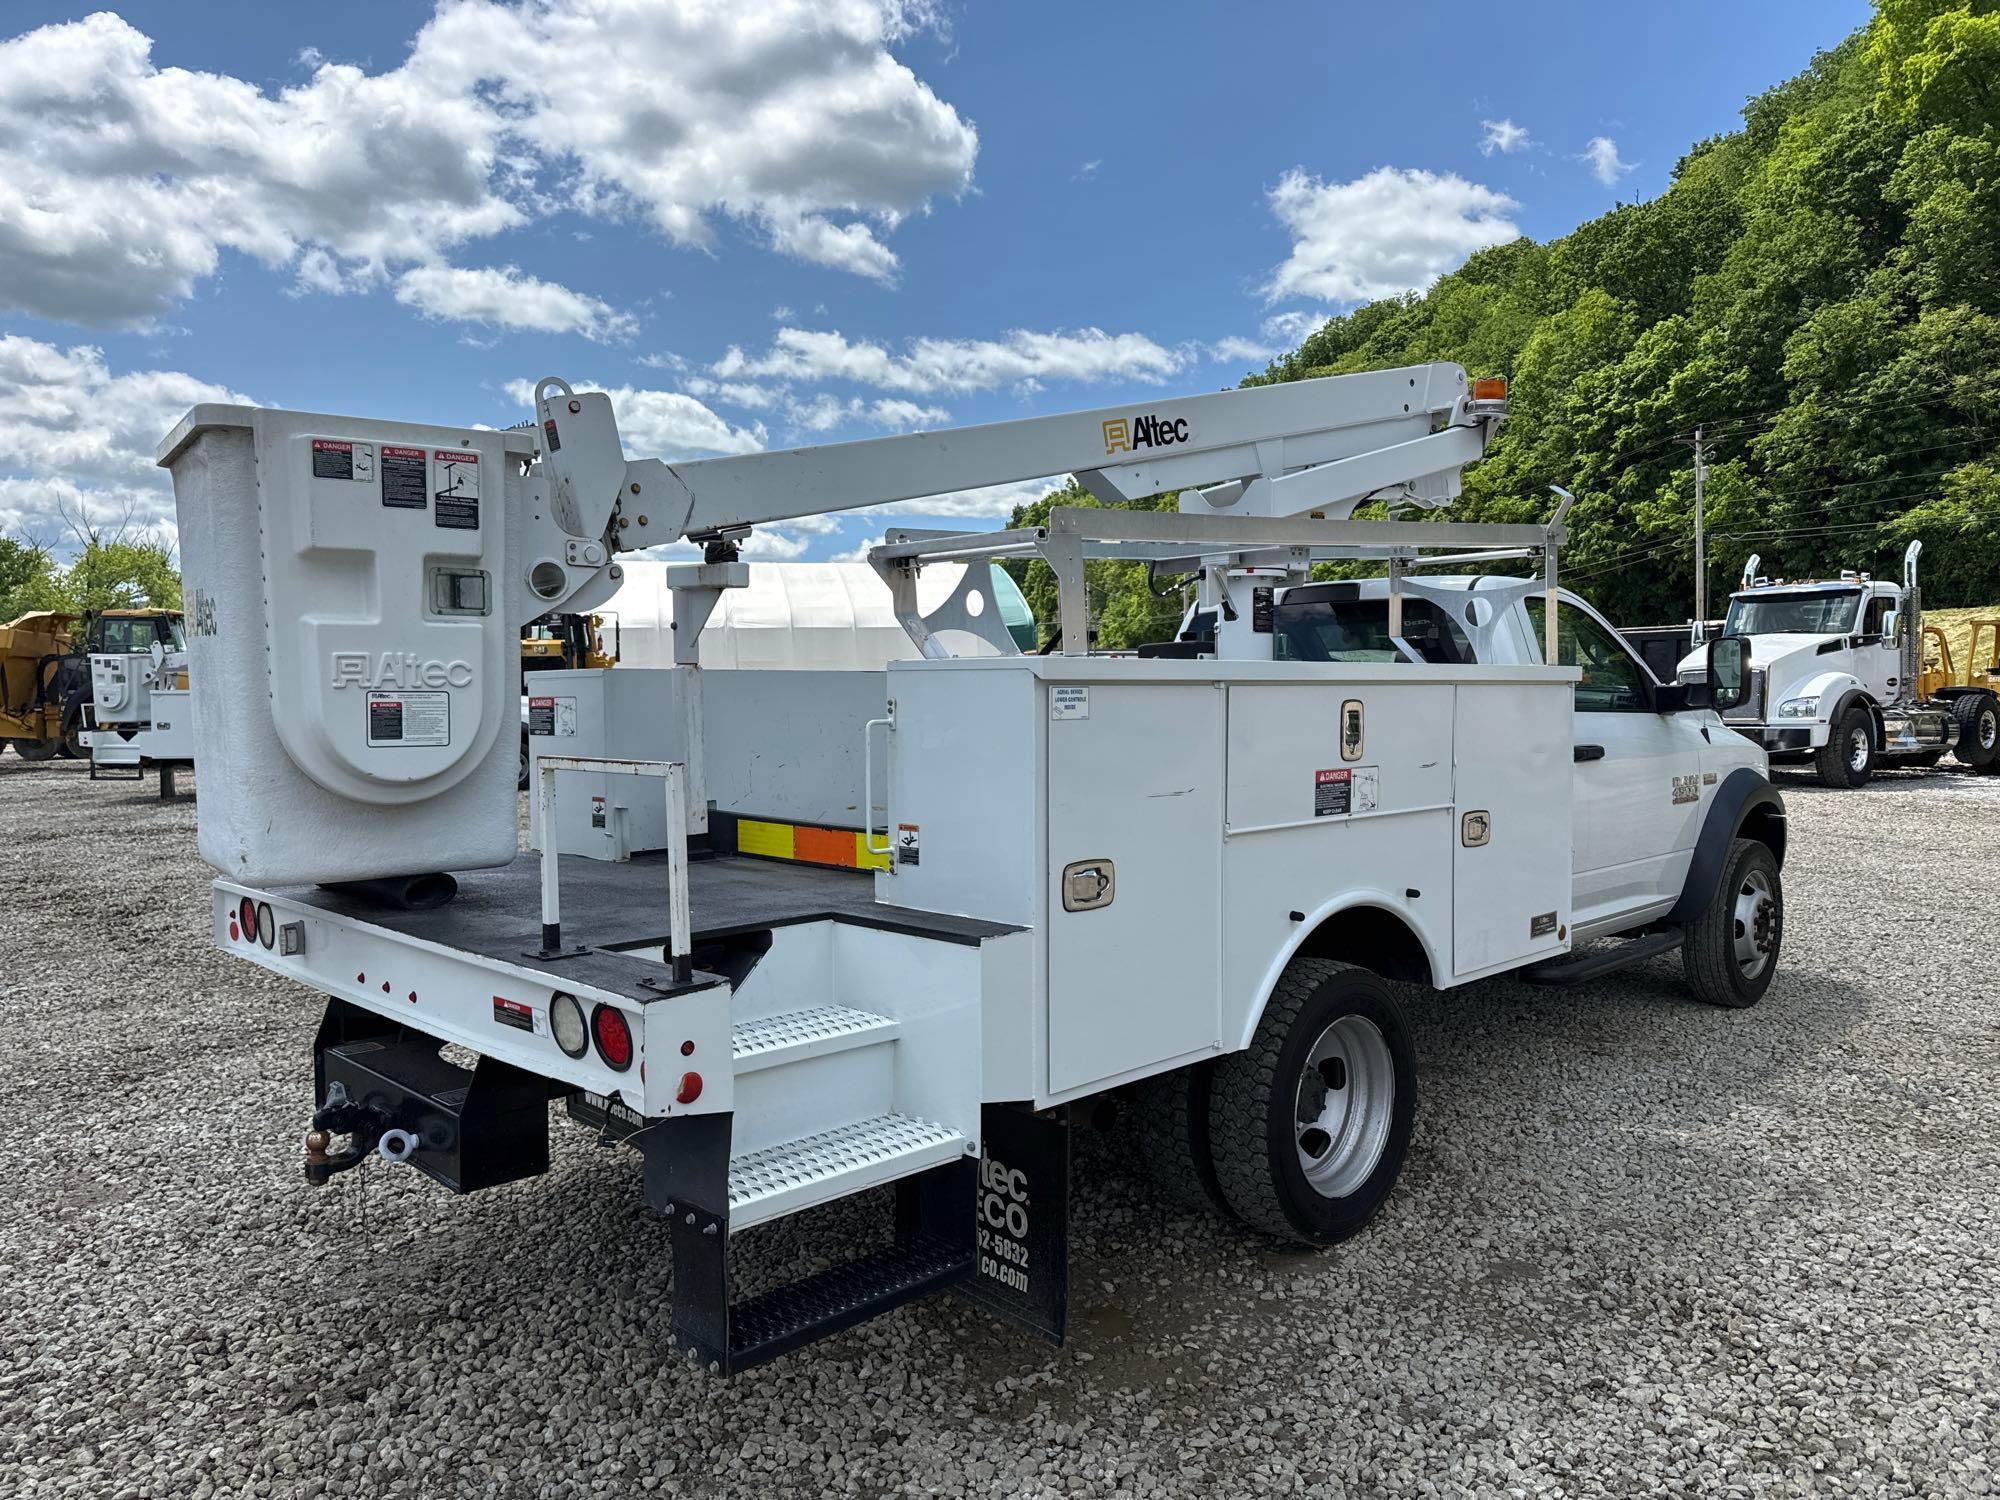 2016 DODGE 4500 BUCKET TRUCK VN:342975 powered by 6.4L Hemi gas engine, equipped with Allison